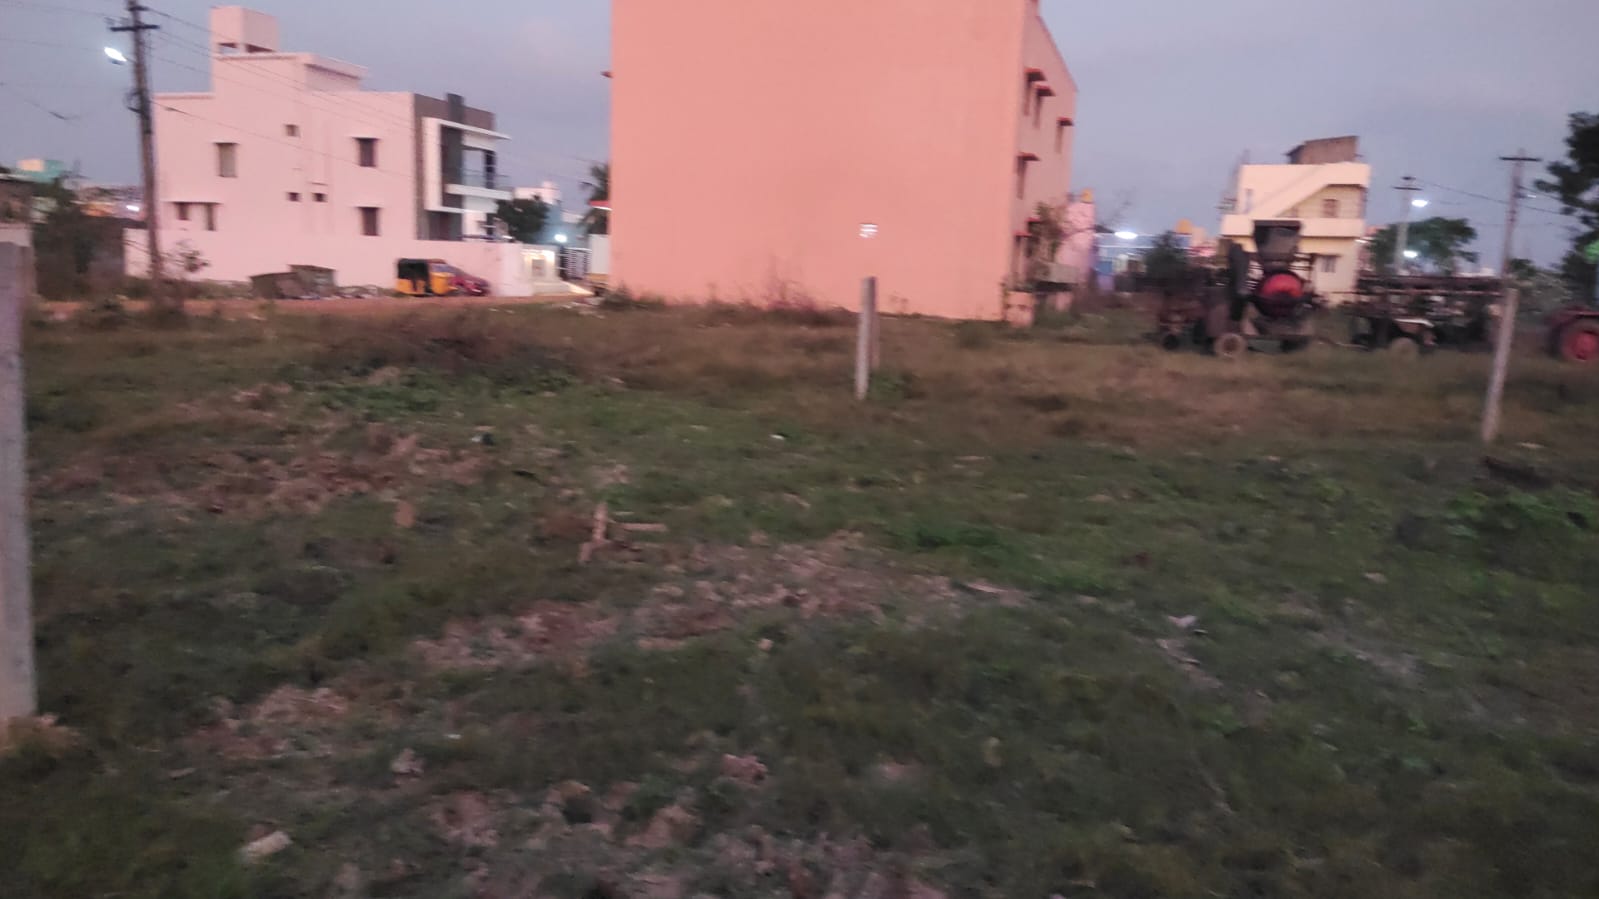 Low Budget CMDA Approved Land in Madhavaram-900 sqft small sized plot nearly Metro Statiion north Madras